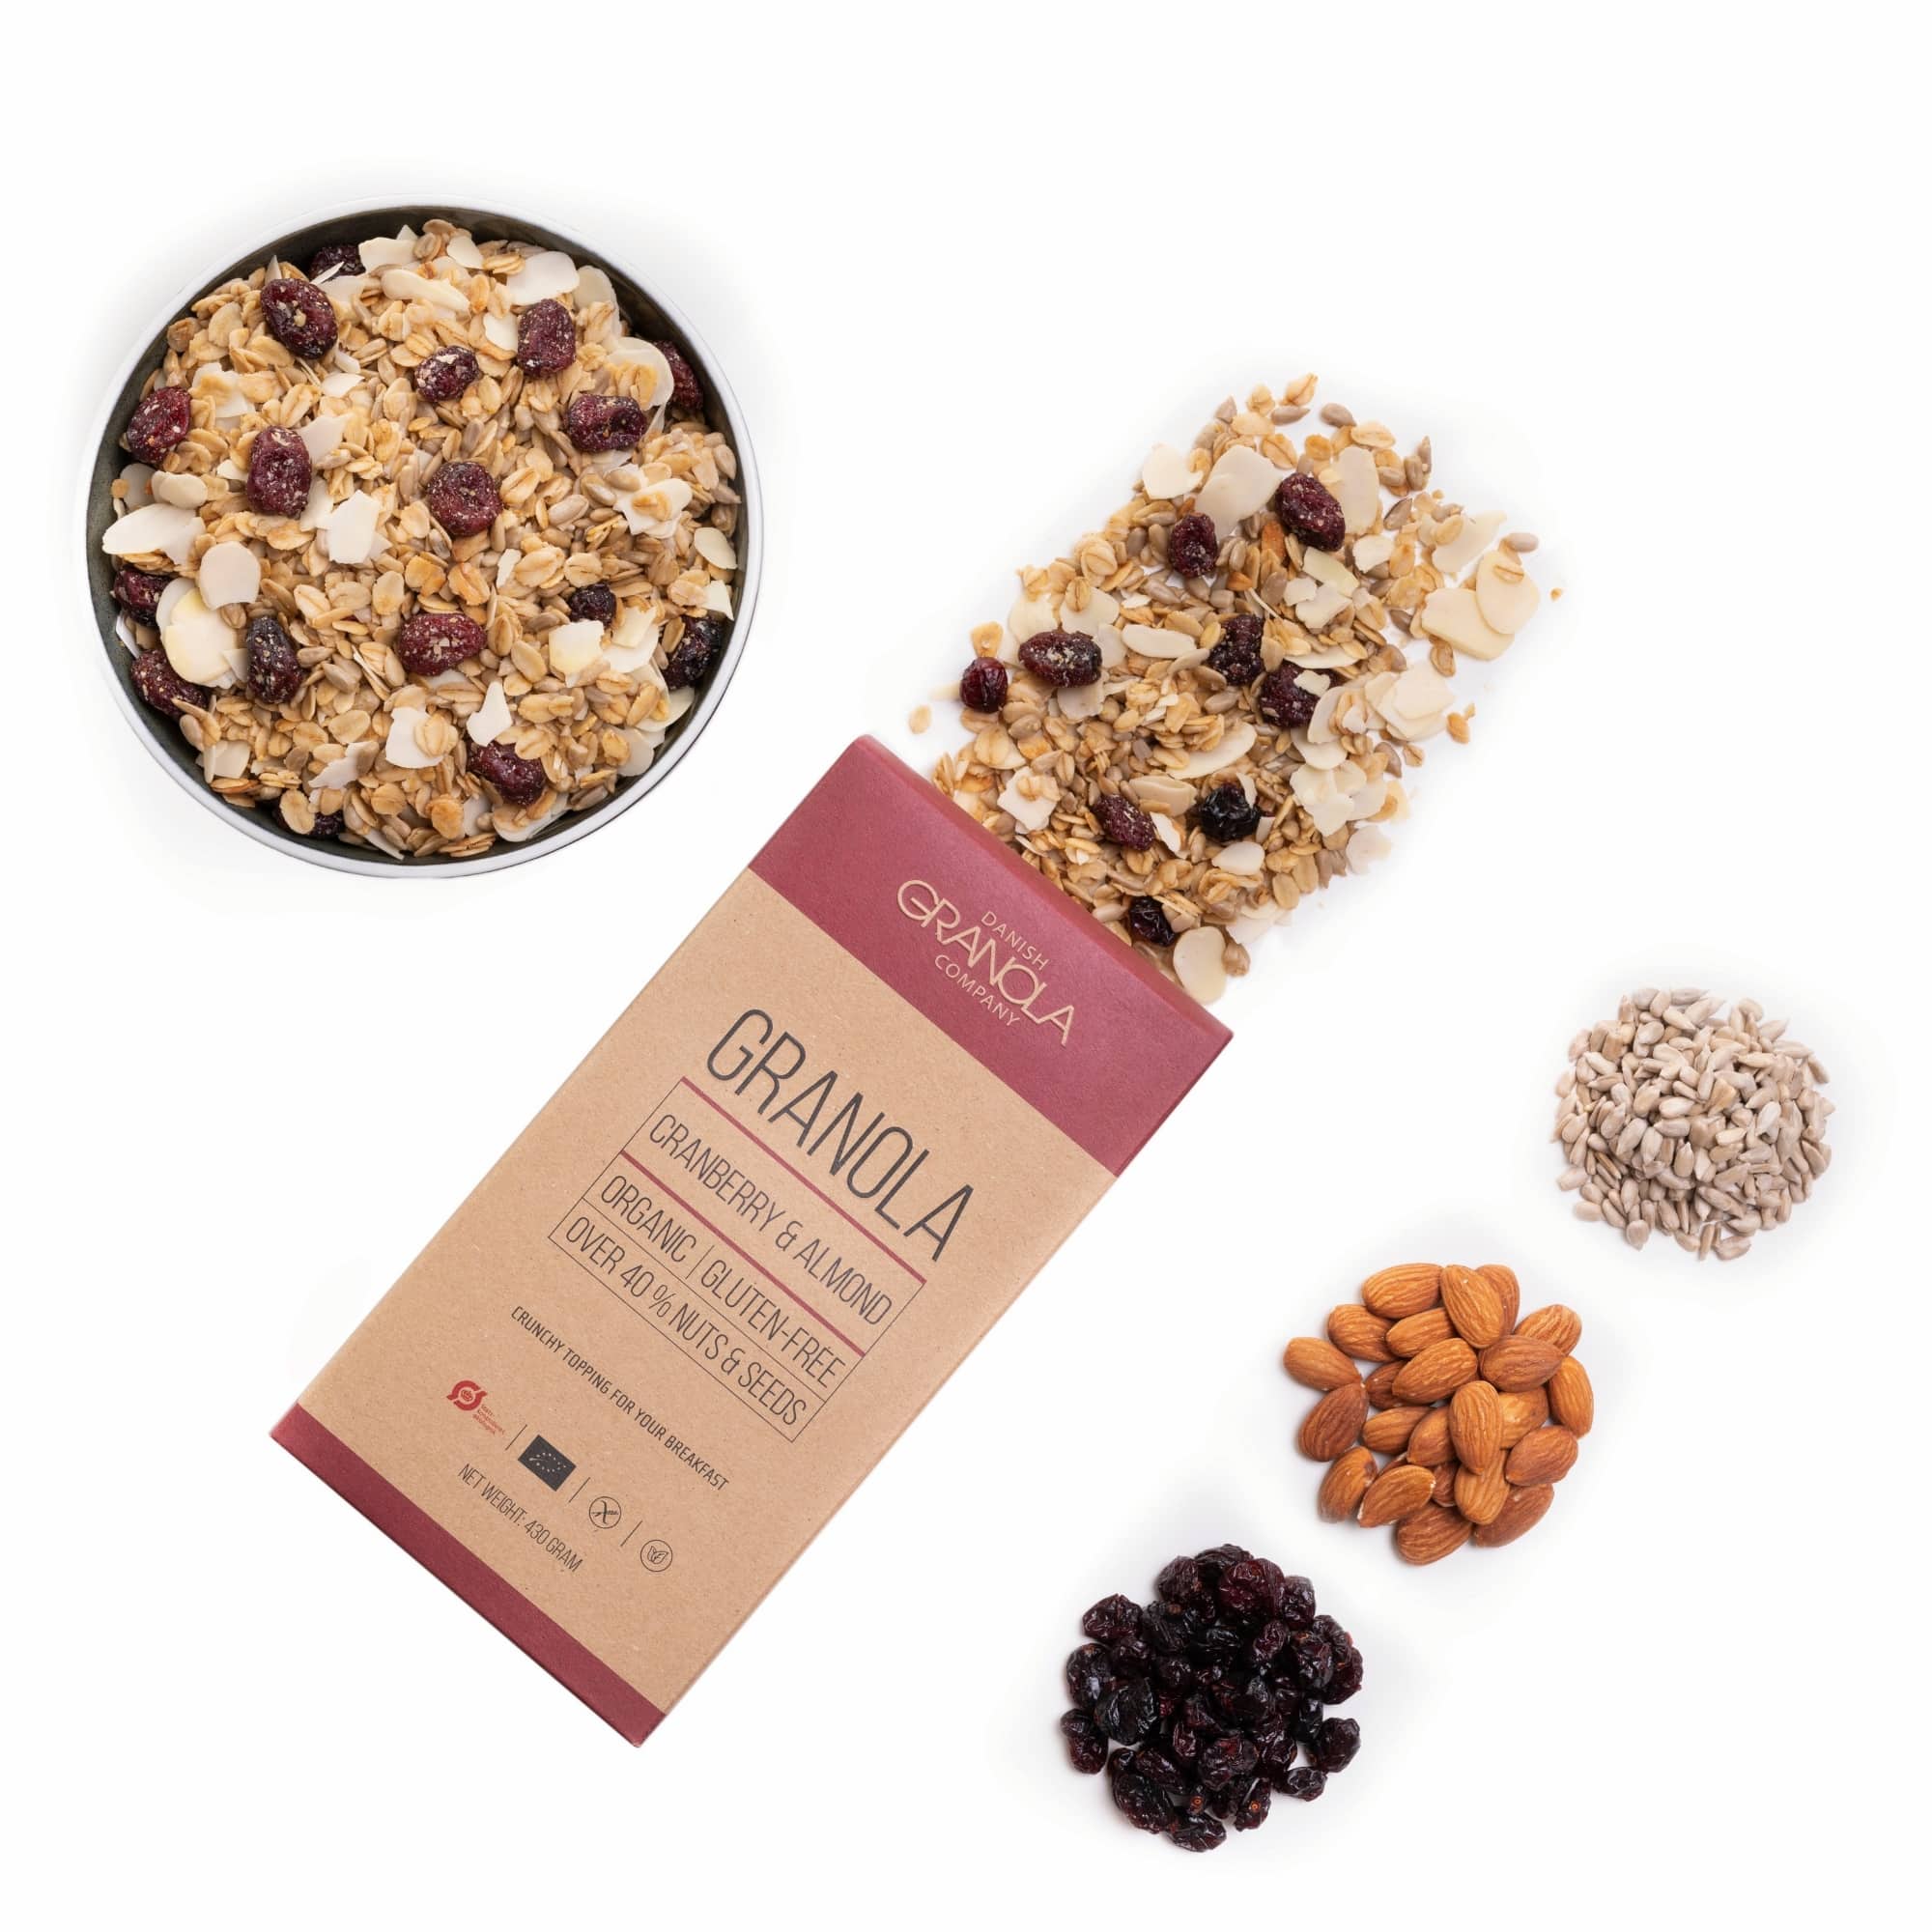 Organic Granola with Almond flakes and Cranberries